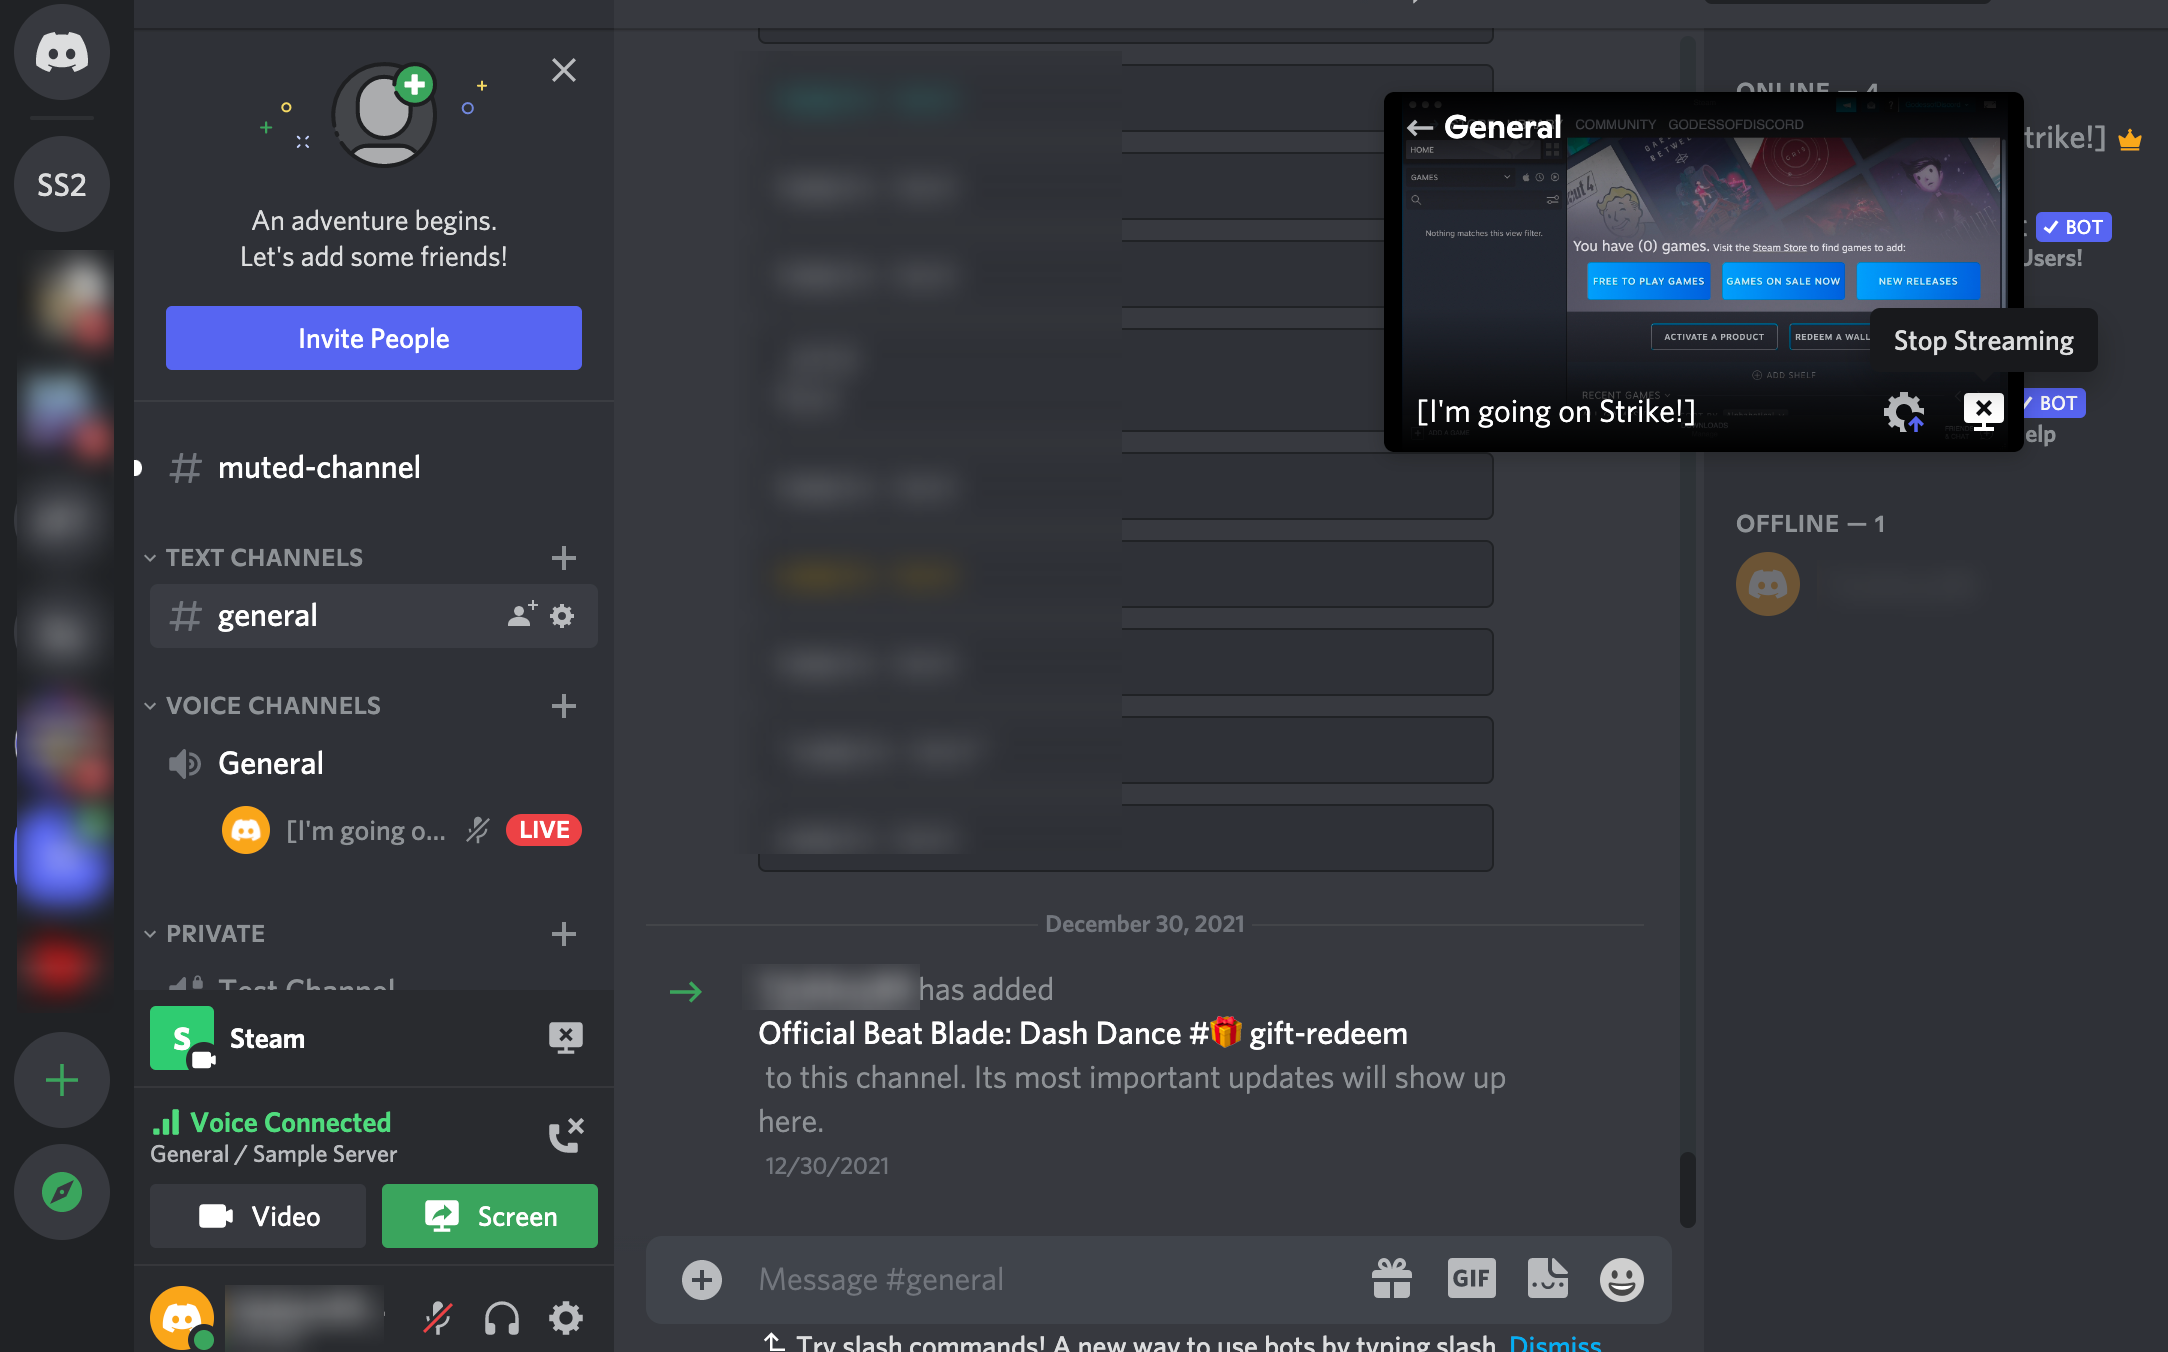 How to Start a Community Discord Server: 4 Ways